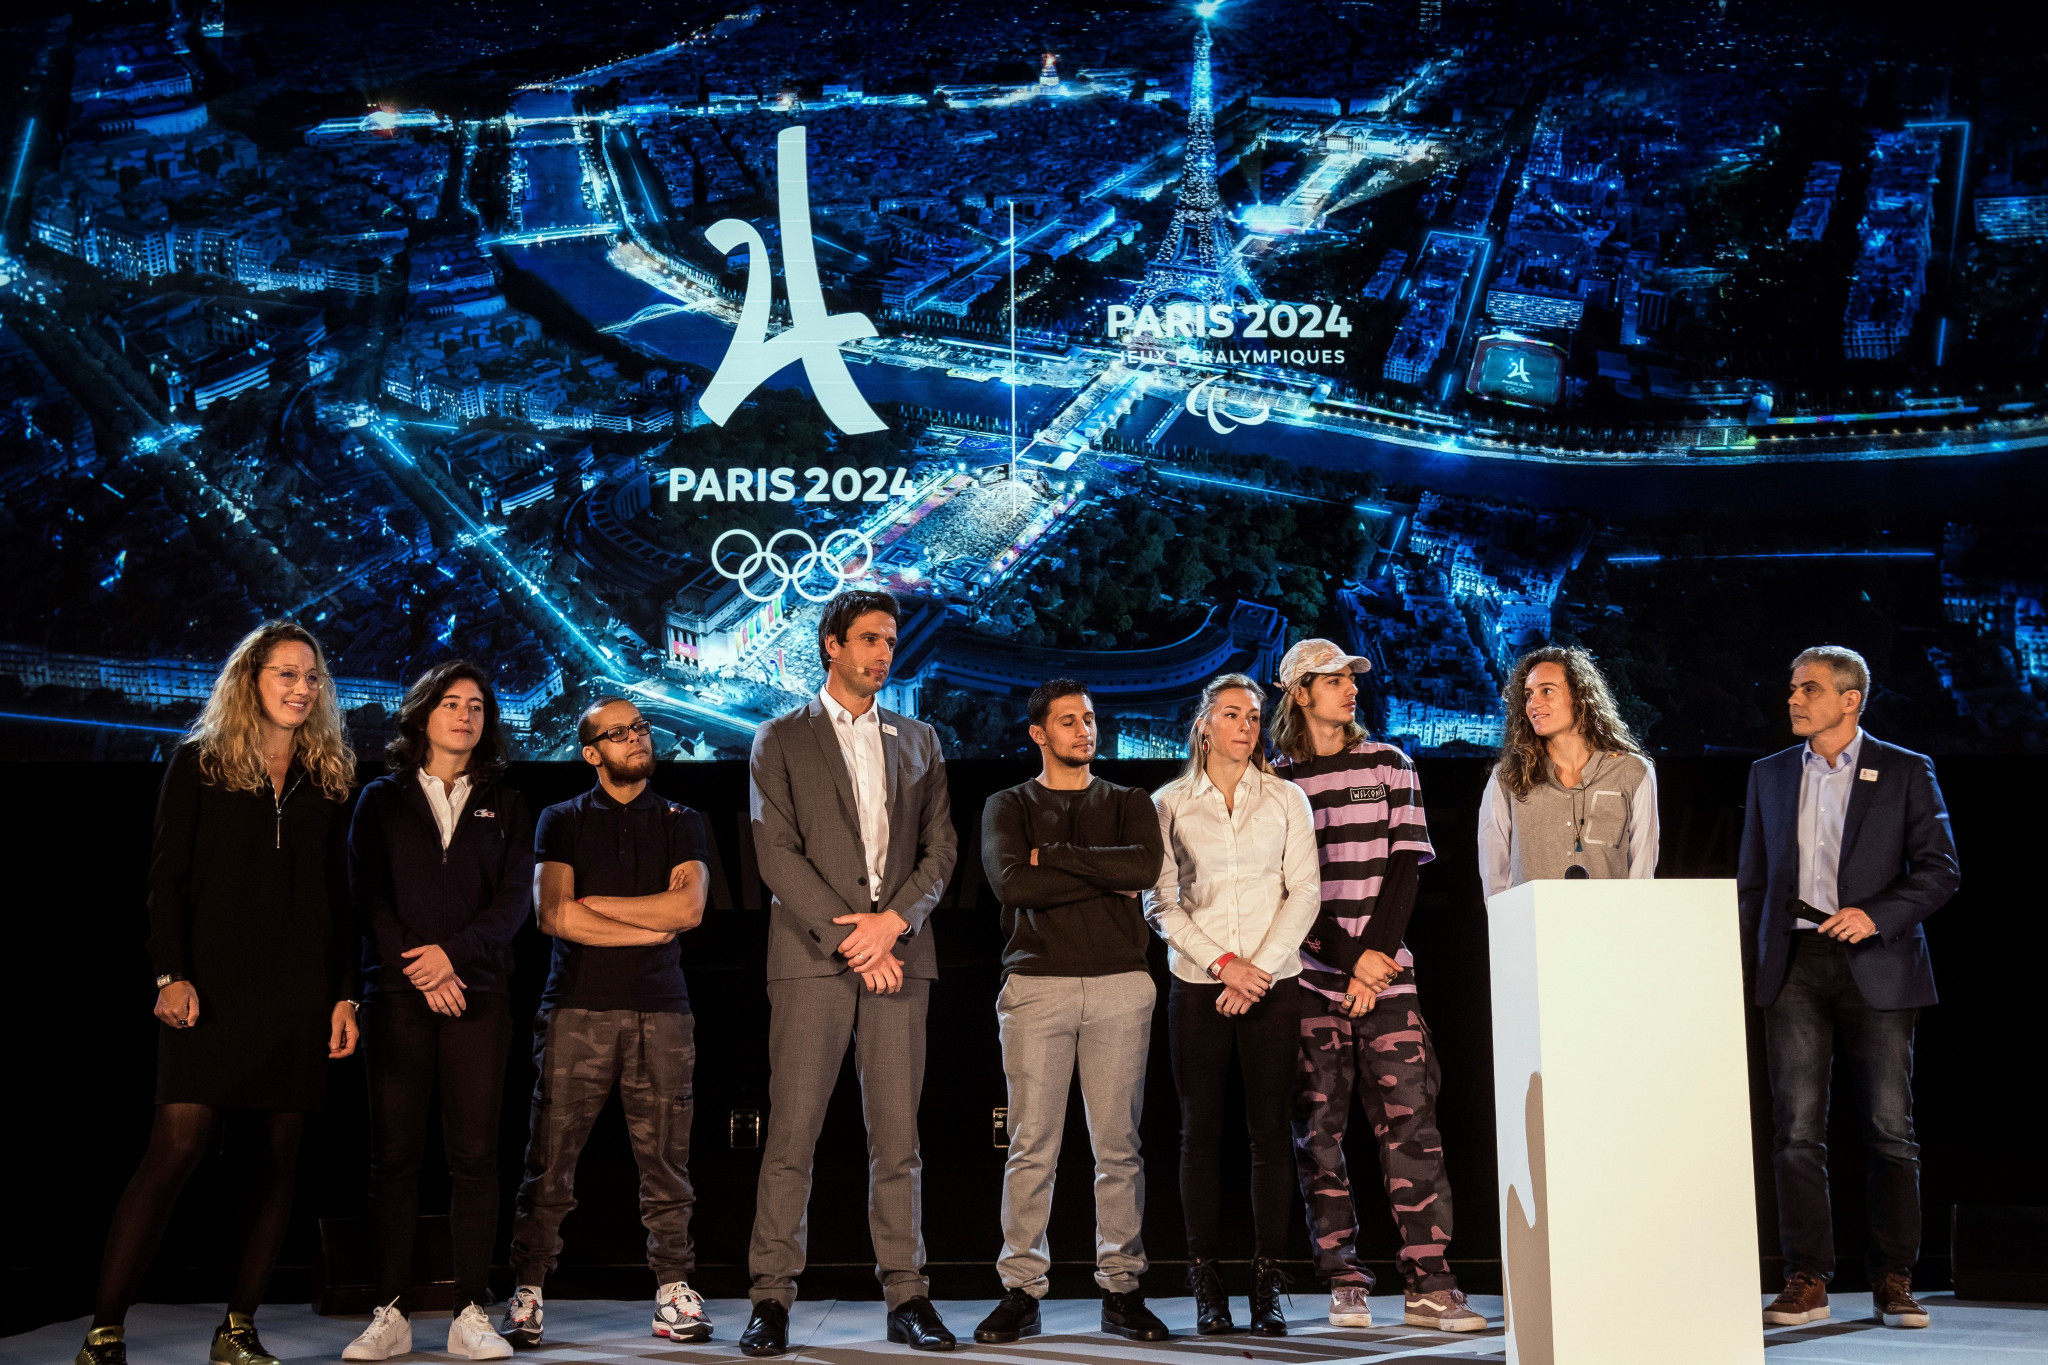 Paris 2024 President Tony Estanguet, fourth left, claimed organisers were hoping to increase engagement from fans with the Olympic Games to help make them more popular in the host city ©Getty Images